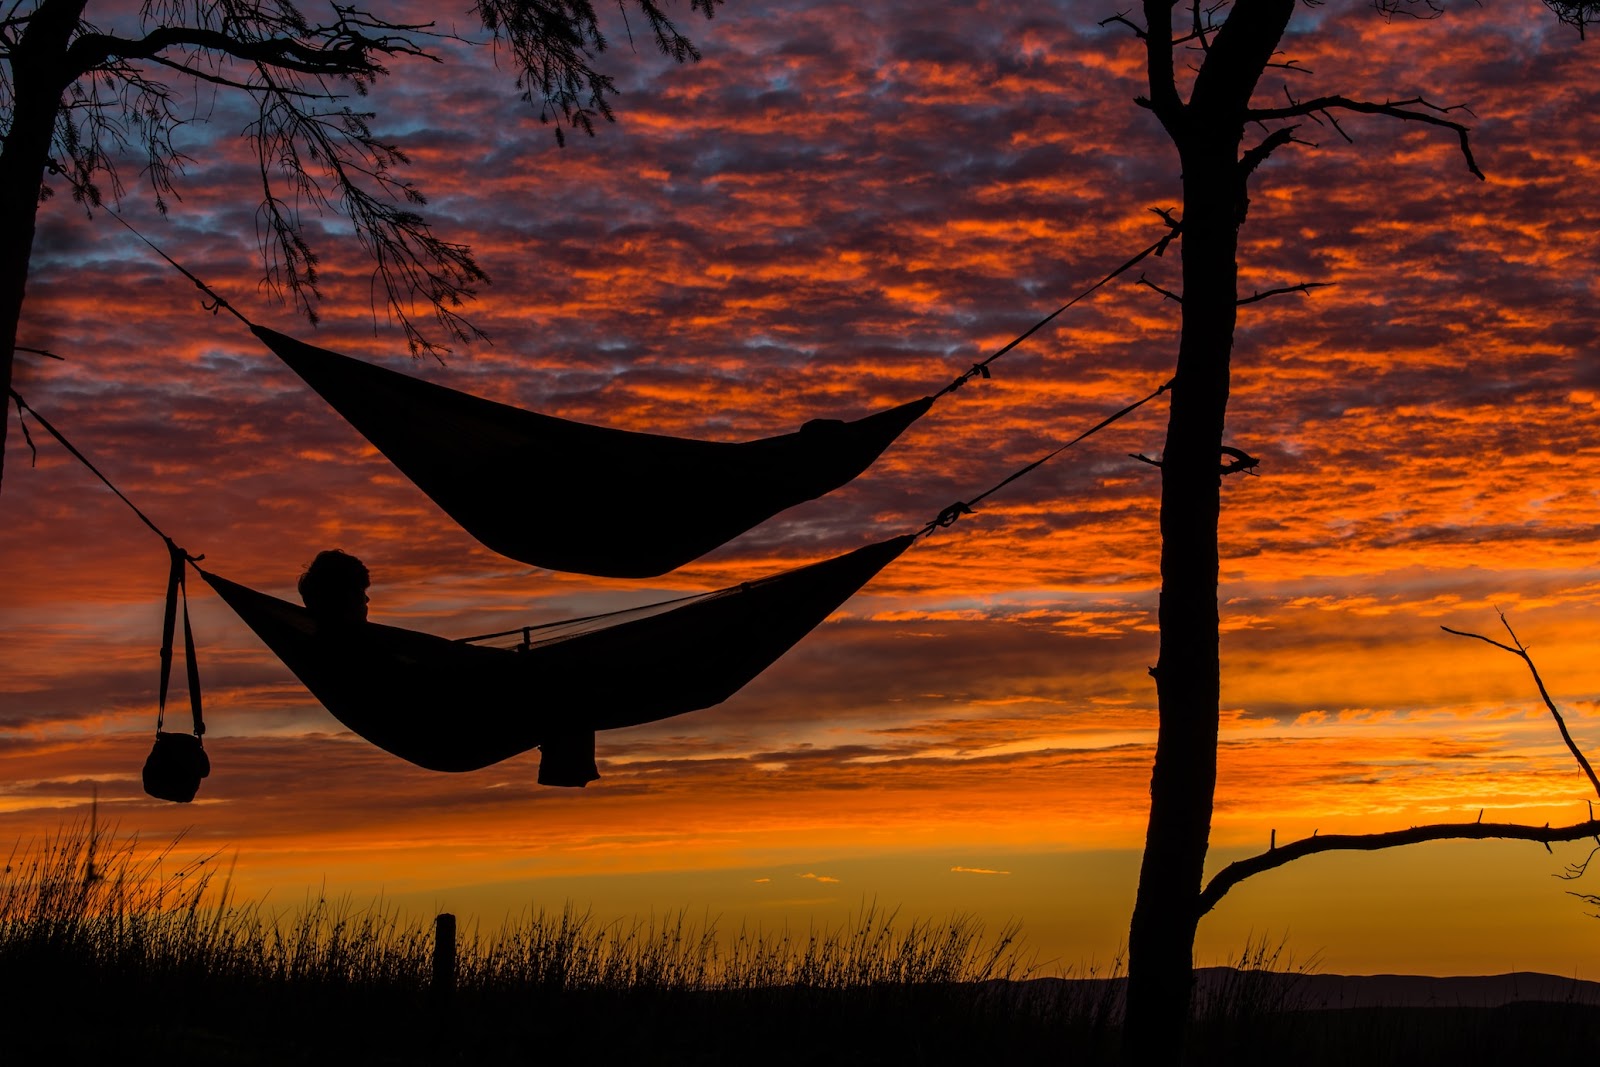 The Top 8 Ways to Relax and Recharge After a Busy Day